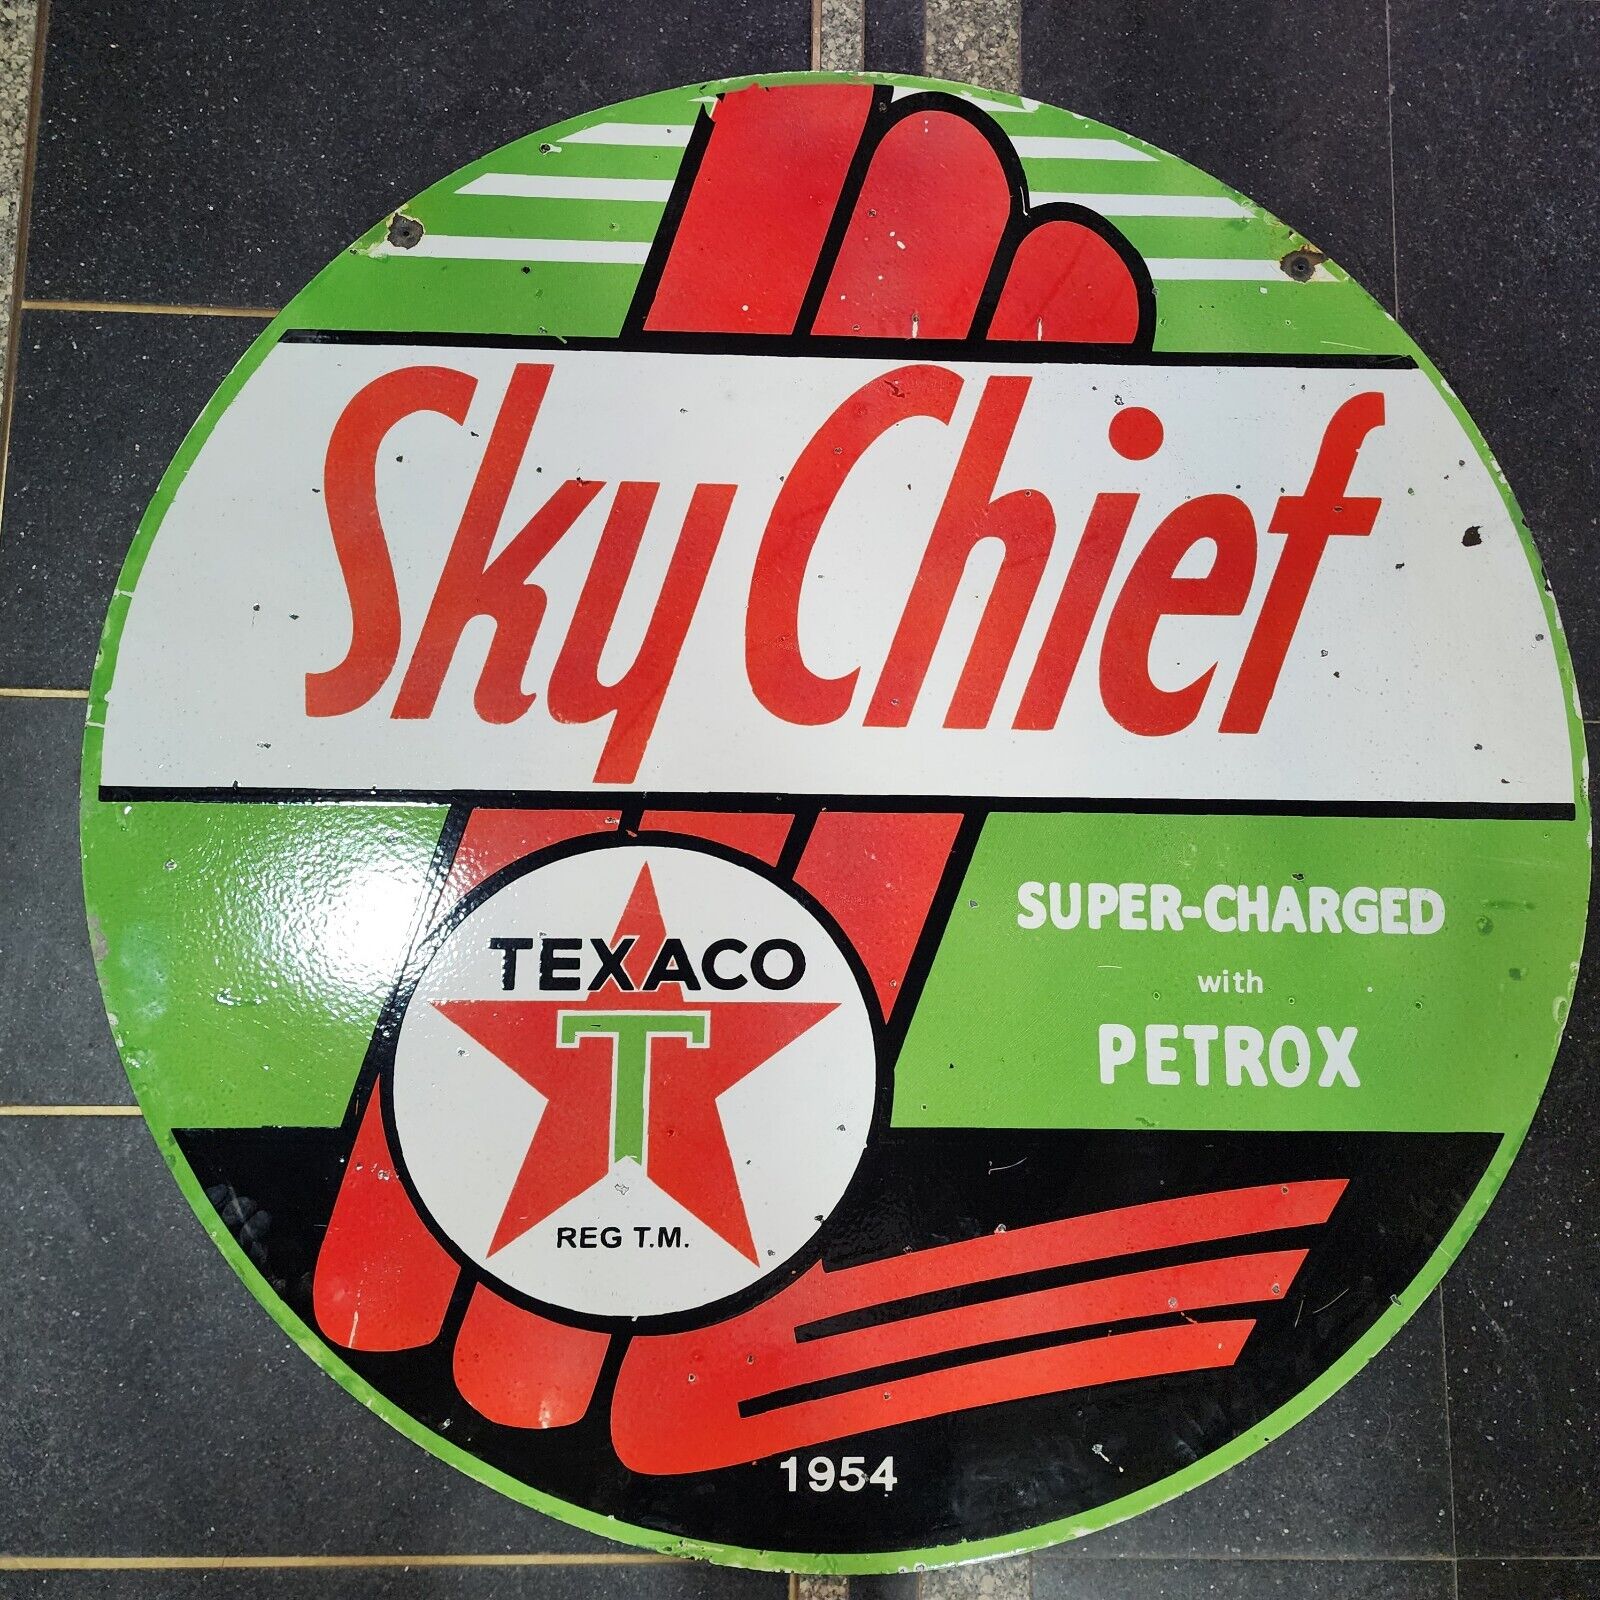 SKY CHIEF 2 SIDED PORCELAIN ENAMEL SIGN 114 CM ROUND